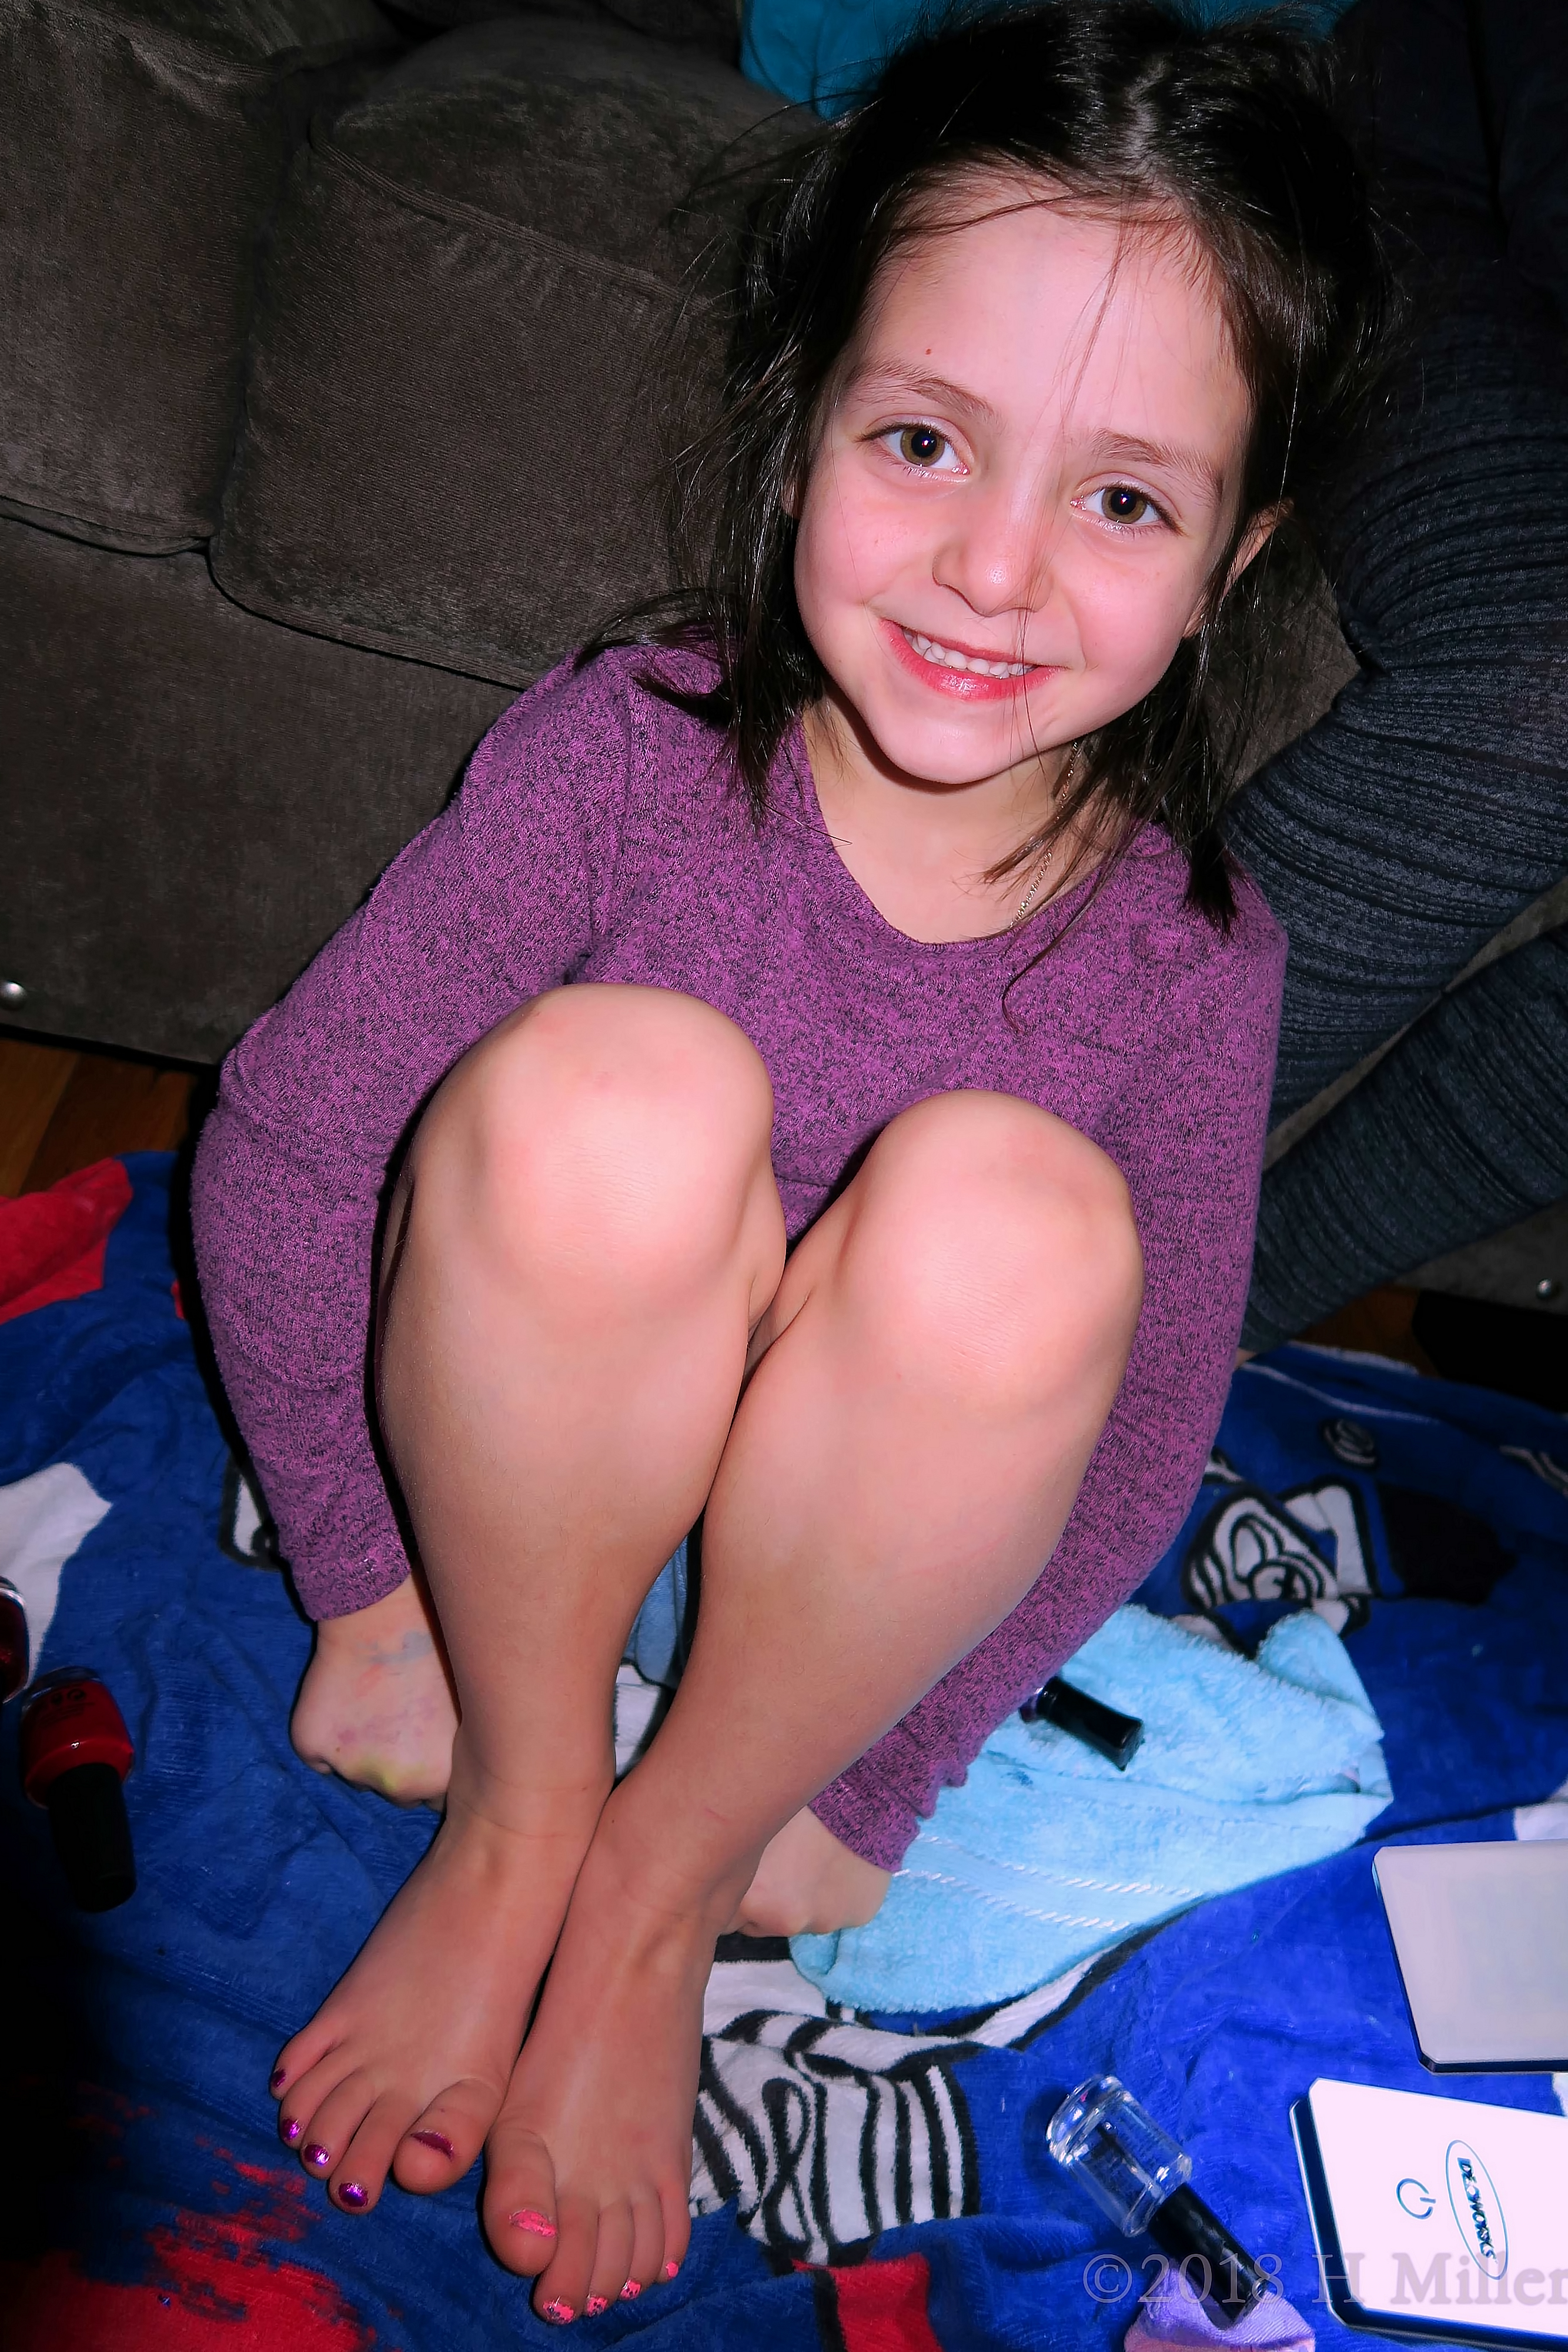 Party Guest Poses With Purple And Pink Polish On Kids Pedicure! 